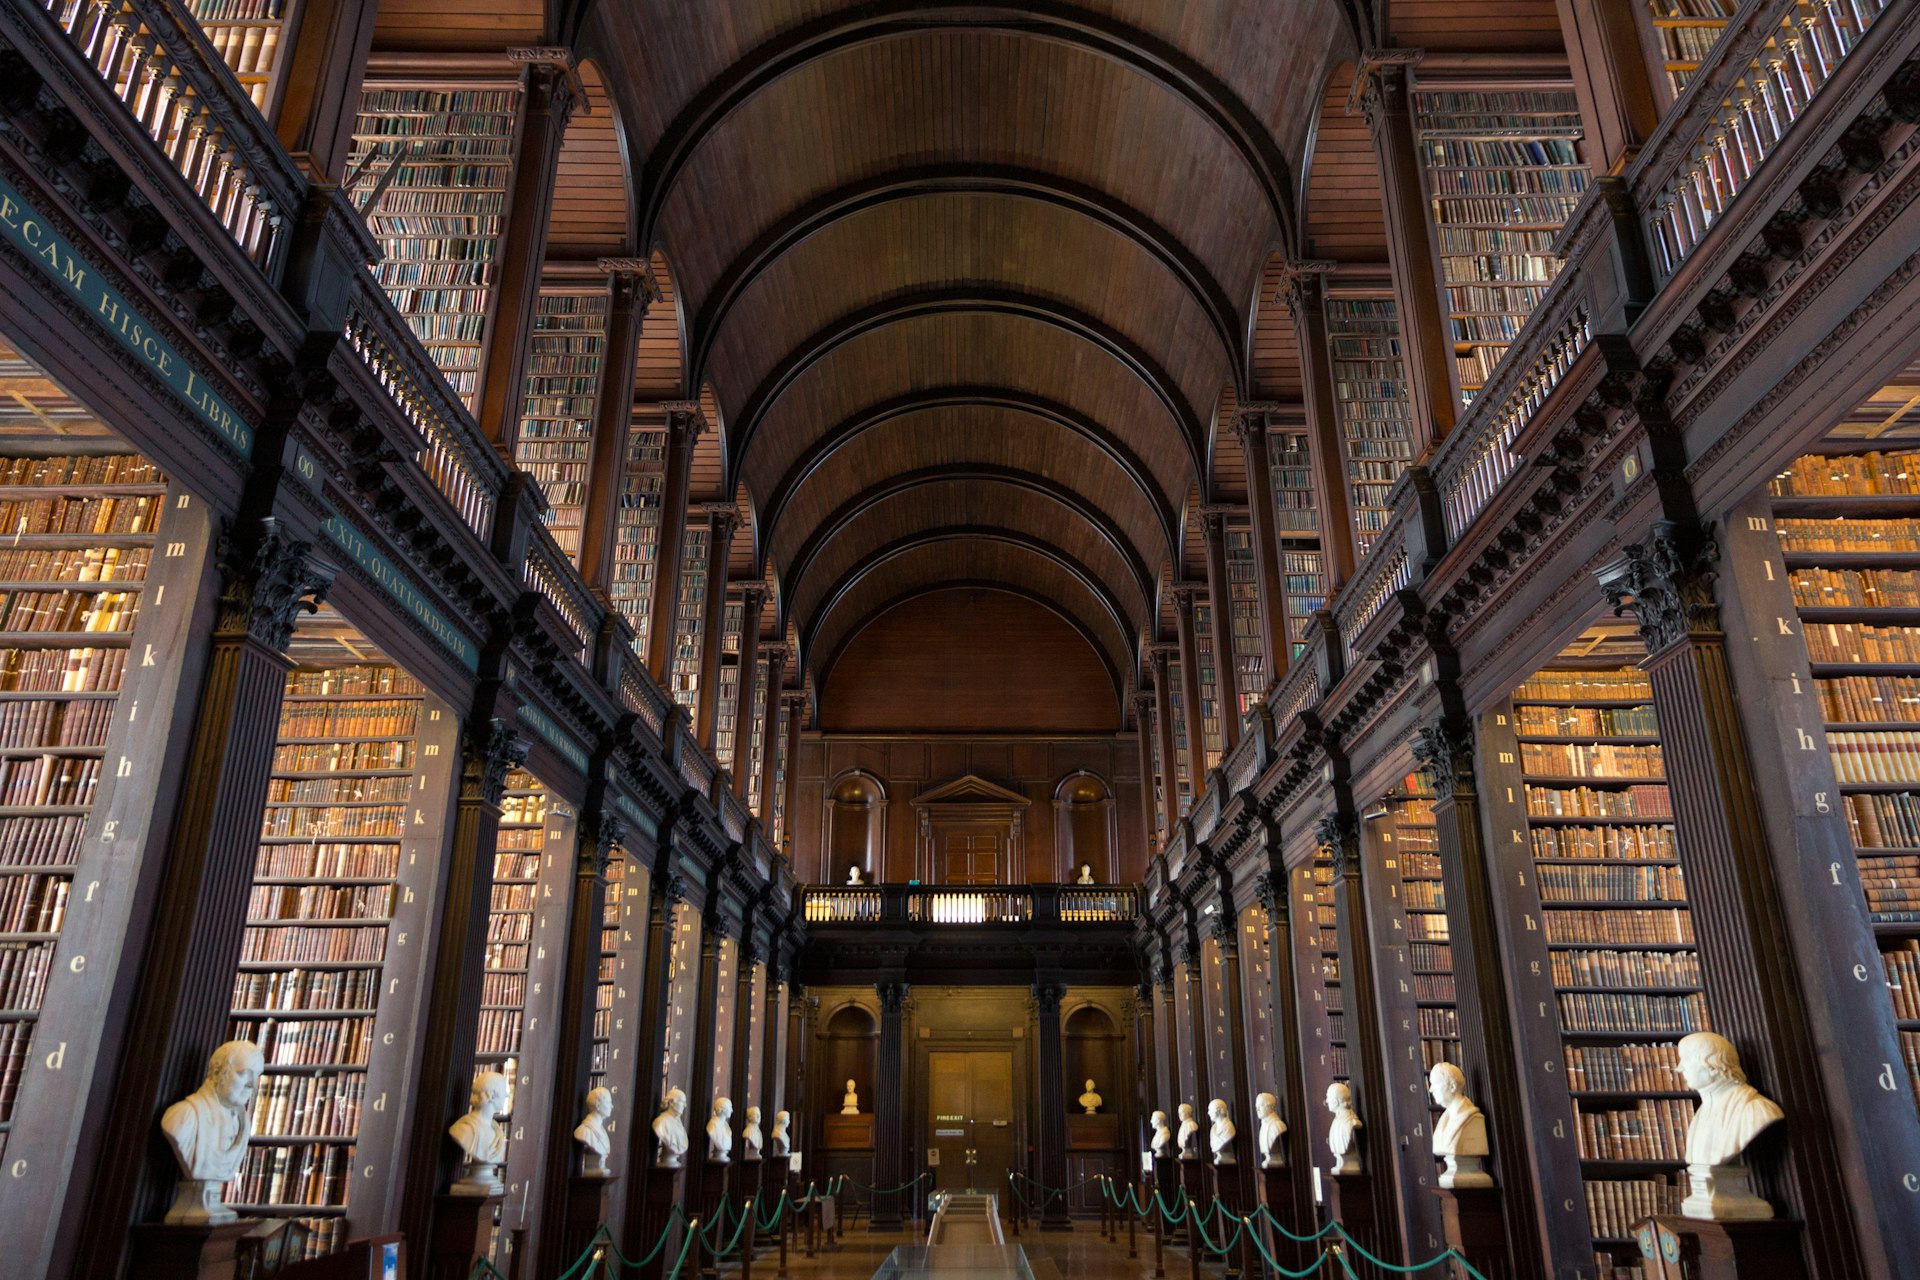 Symmetrical rows of bookshelves in the Long Room in the Trinity College Library